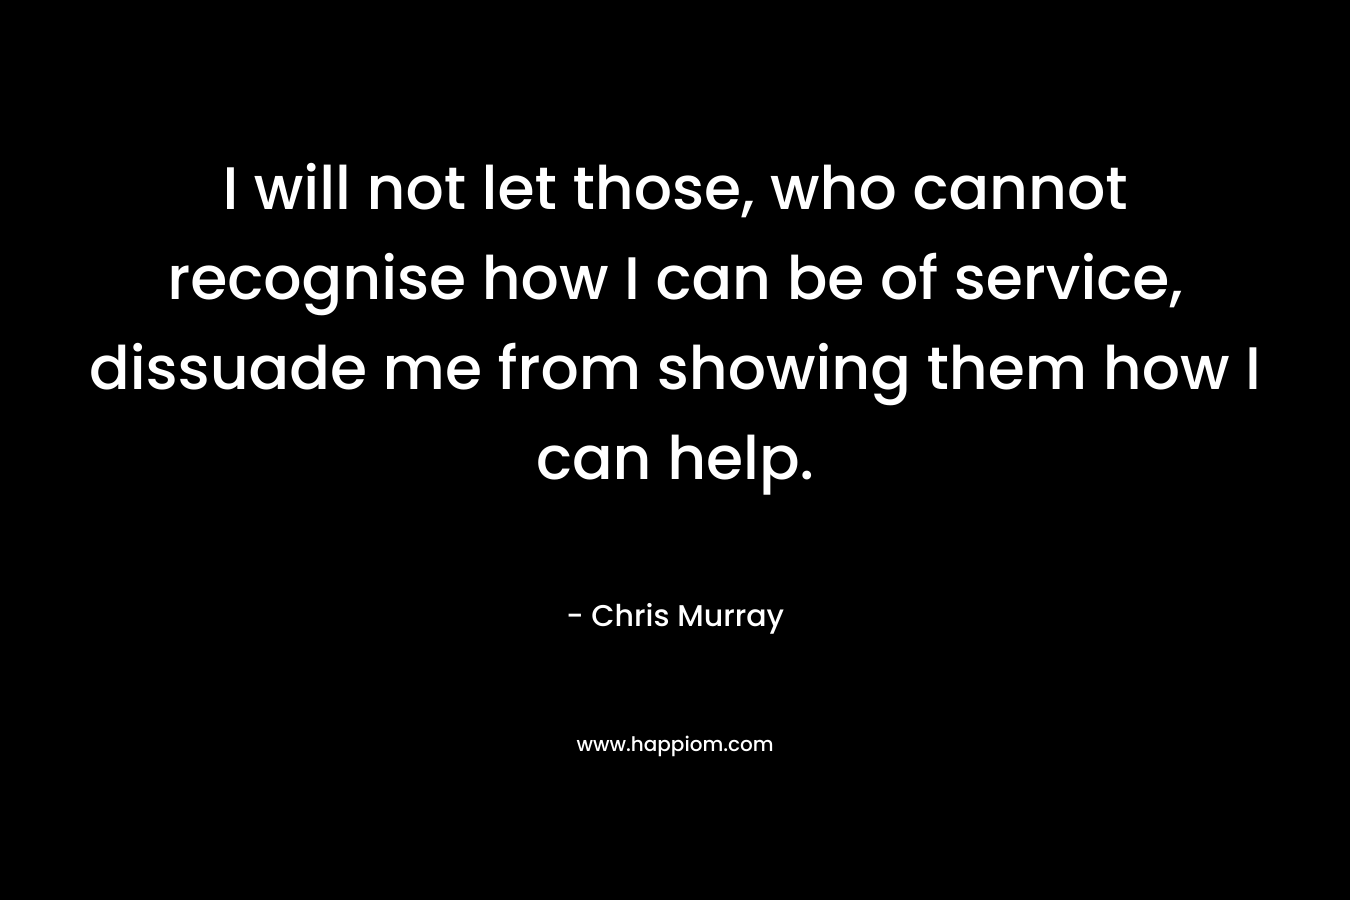 I will not let those, who cannot recognise how I can be of service, dissuade me from showing them how I can help.